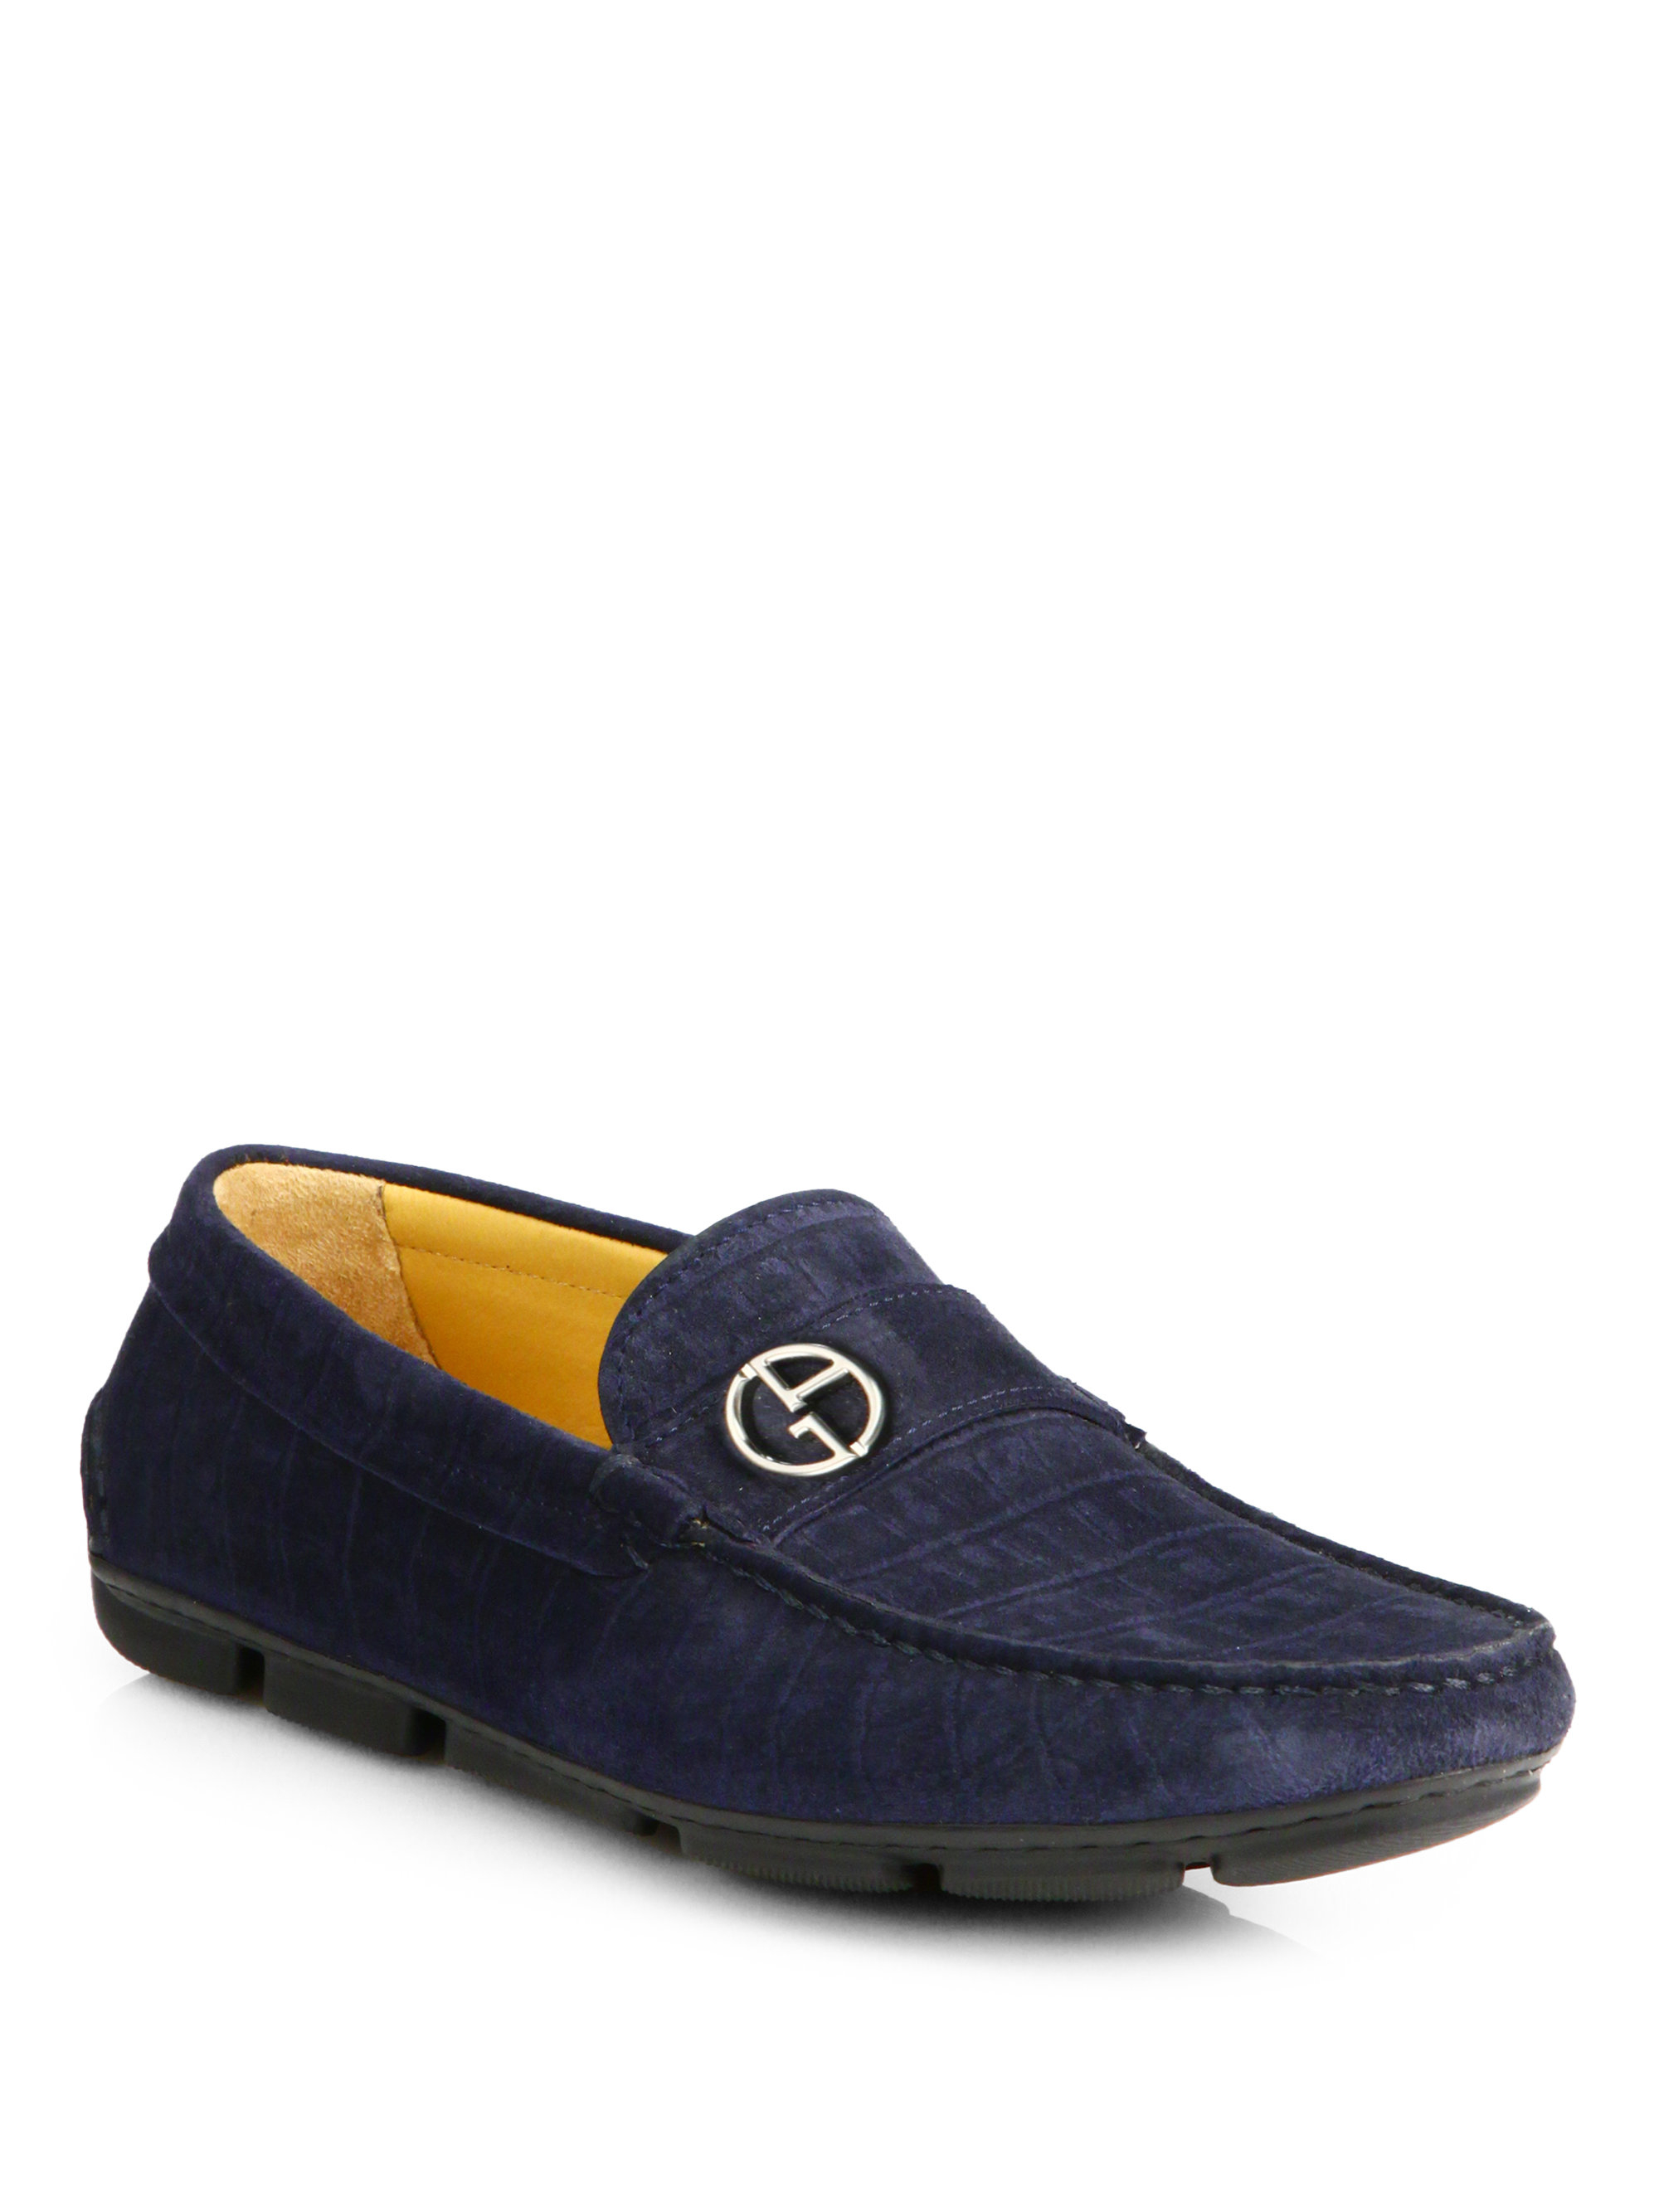 Giorgio Armani Croc-Embossed Suede Driving Loafers in Blue for Men | Lyst